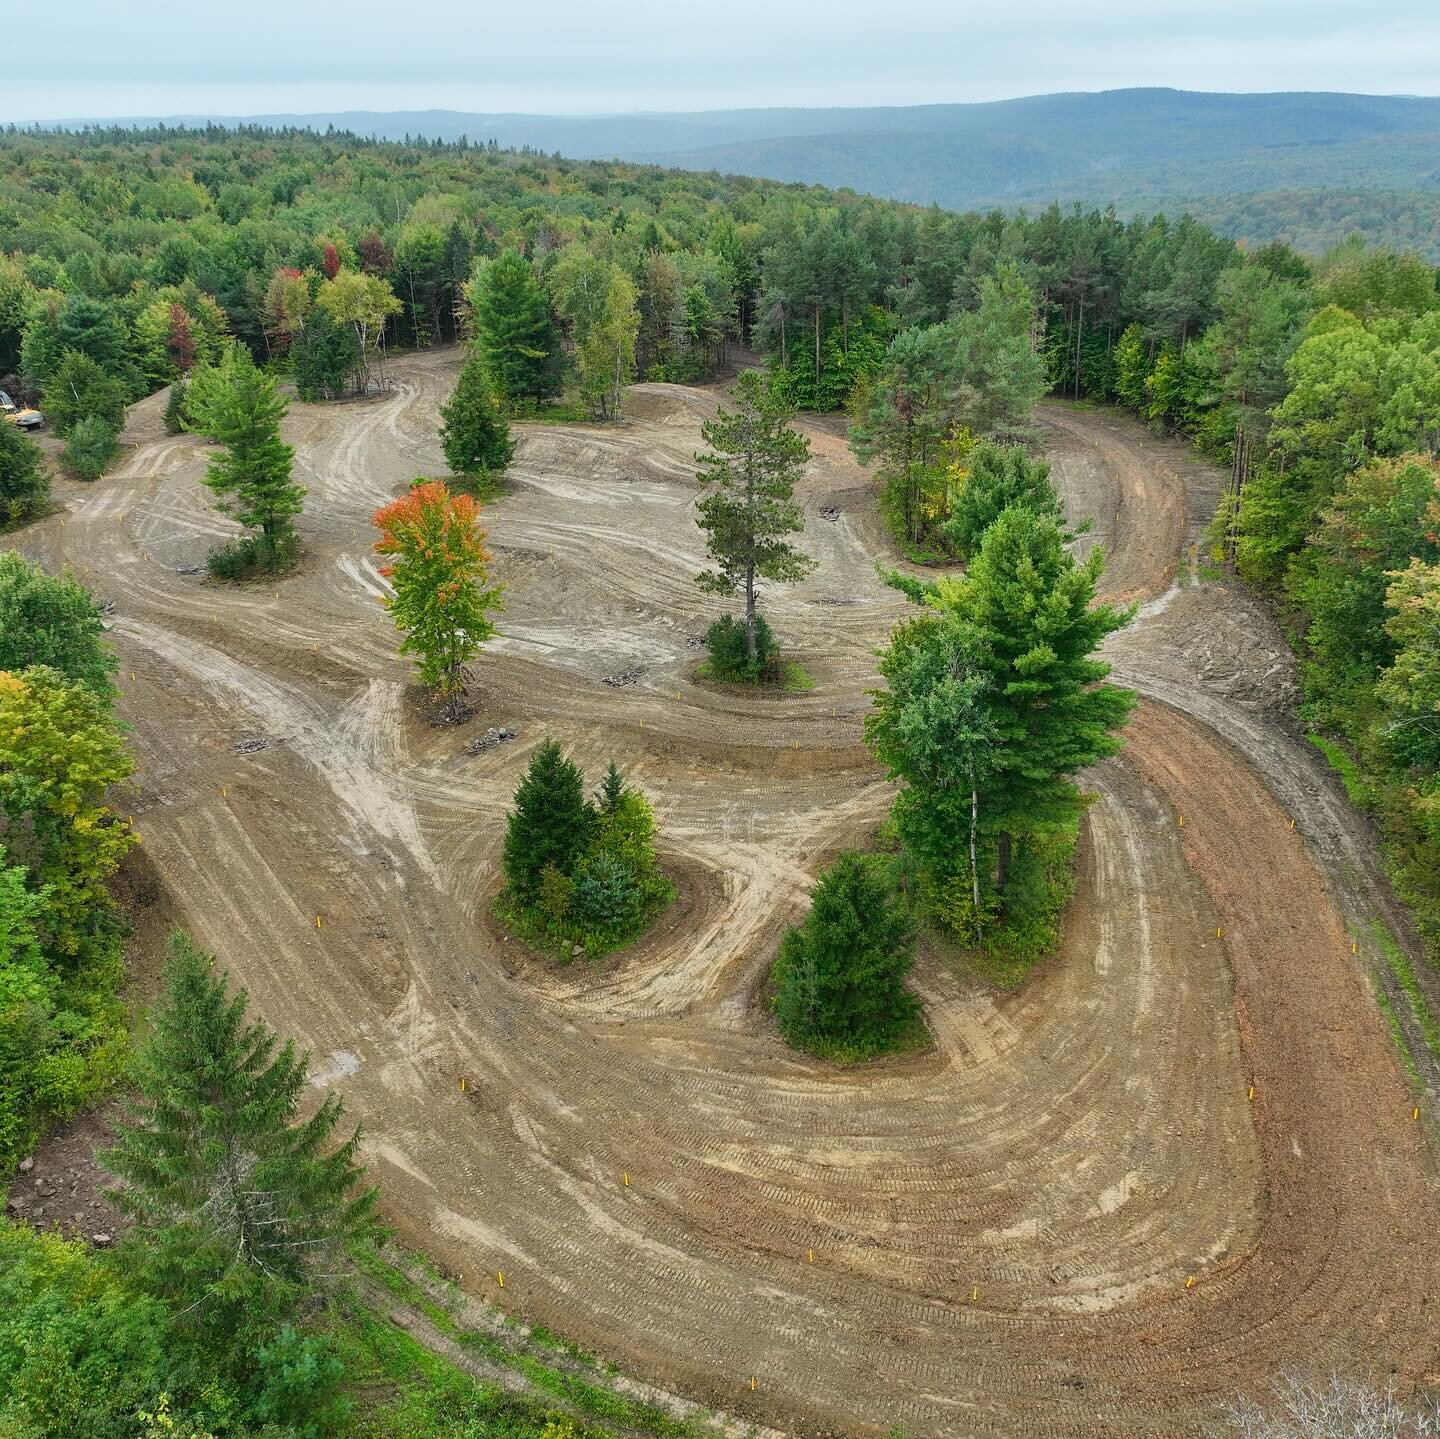 🌲Cobleskill Motocross🌲

A lot of work went into turning a portion of this forest into a private motocross track. Our team cleared and chipped 5 acres of raw forest, stripped the root layer, excavated the site to generate dirt for the track, cut swa